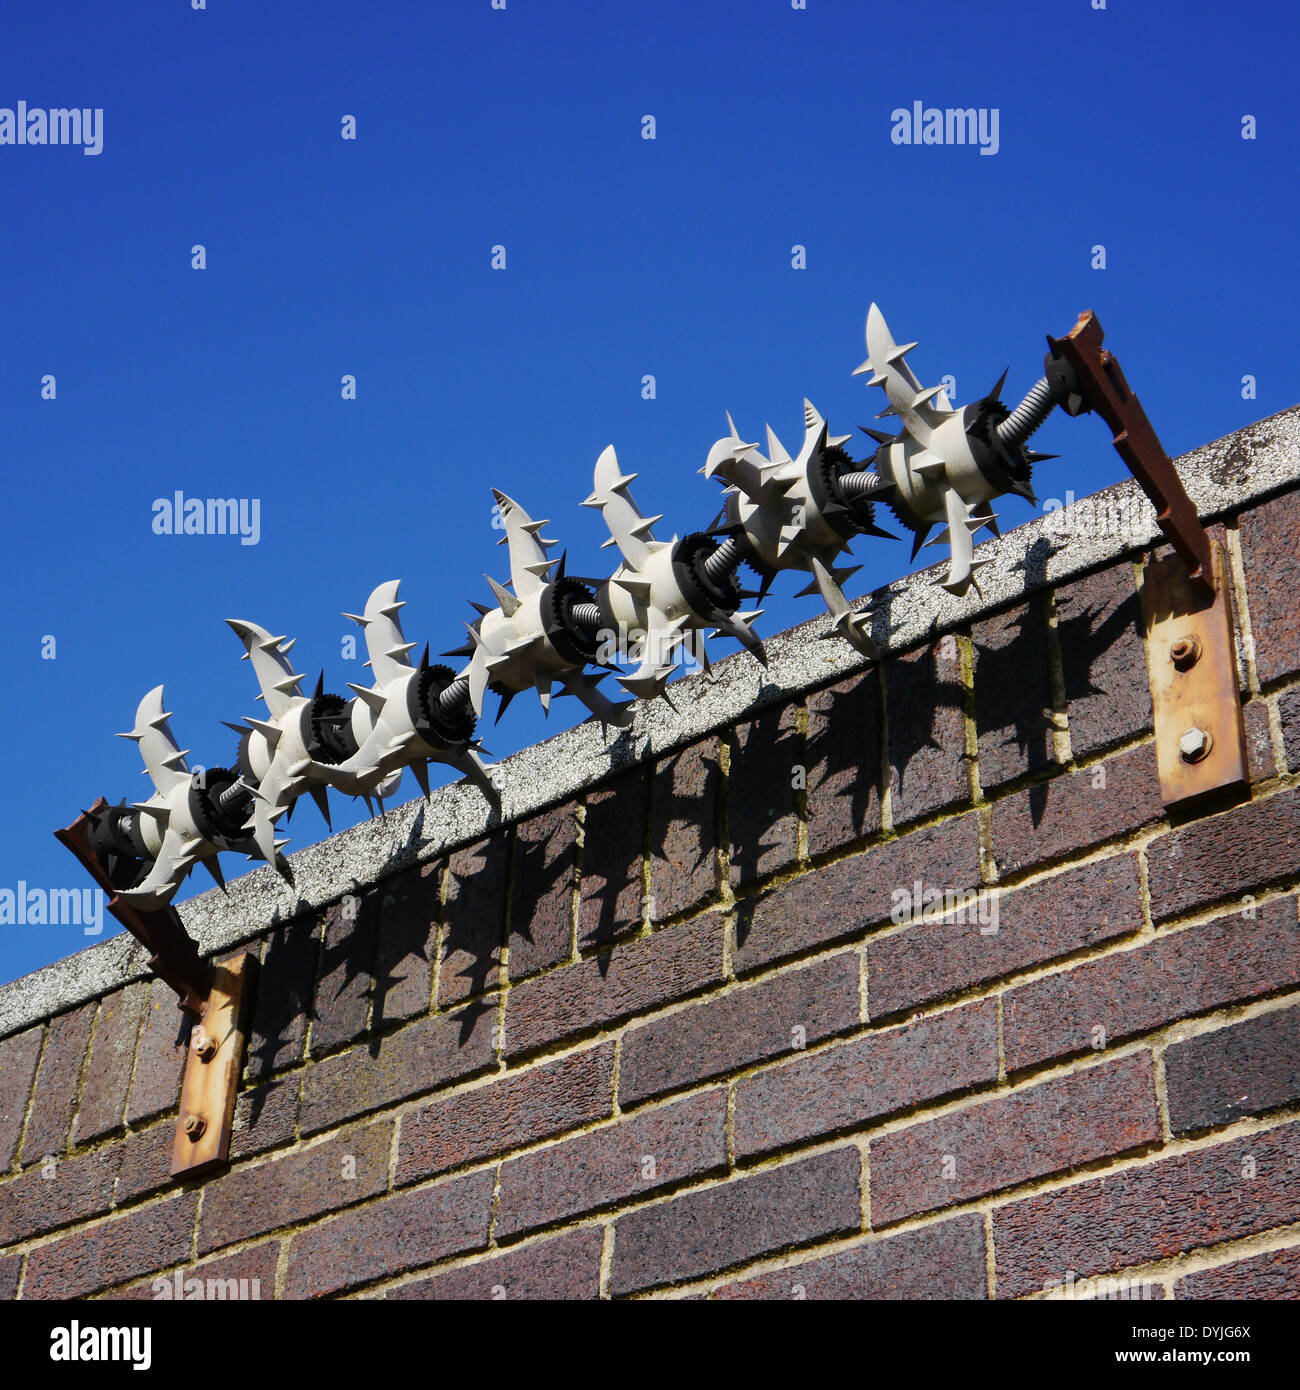 Cactus anti-burglary / theft / crime security / protection measures on a wall Stock Photo